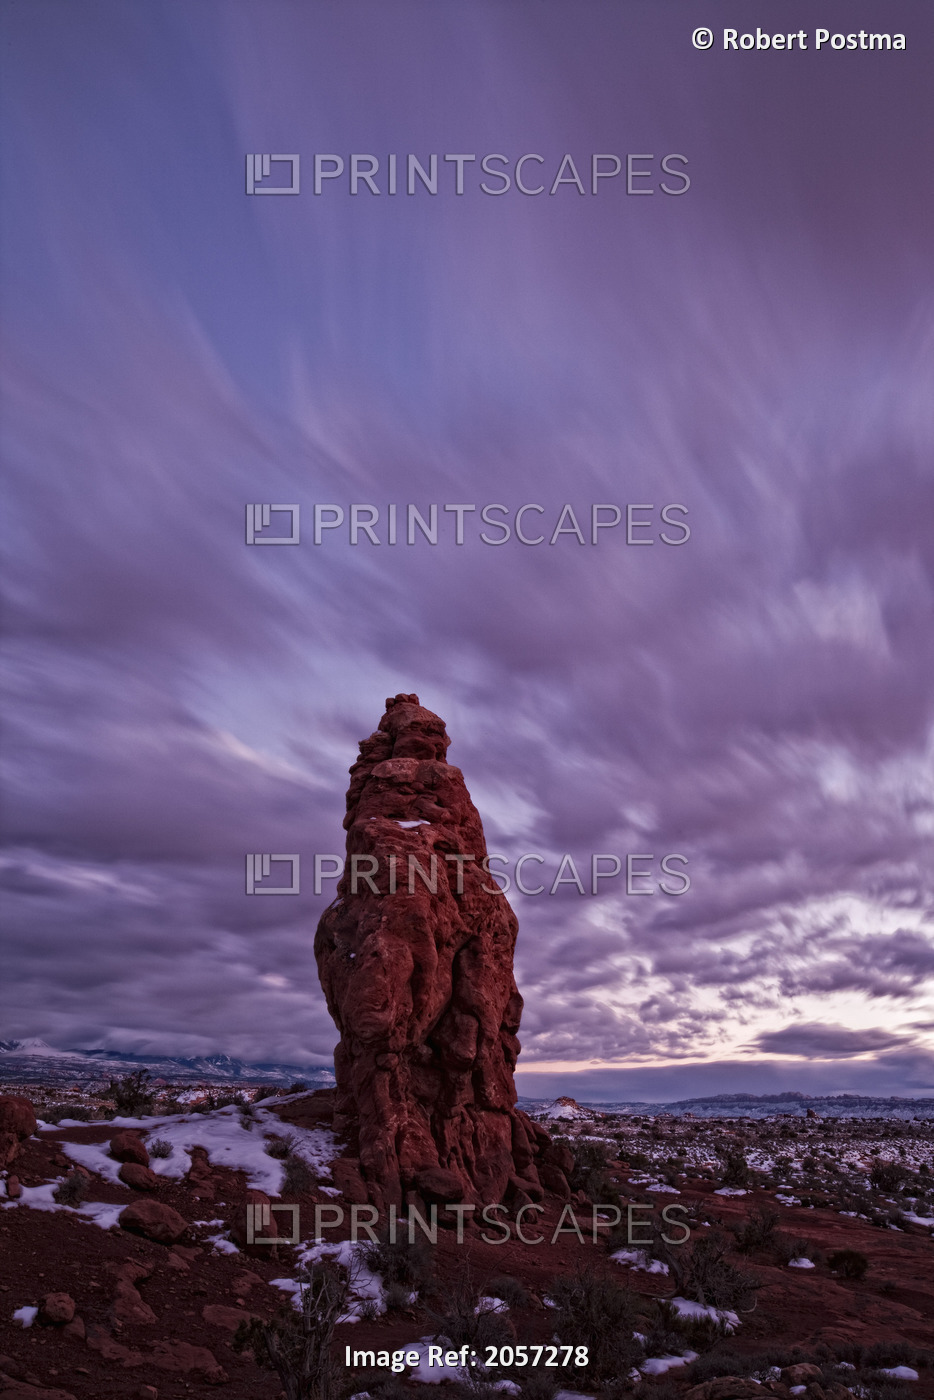 Timed Exposure Of Sunset Clouds Over Pinnacle In Arches National Park, Utah.